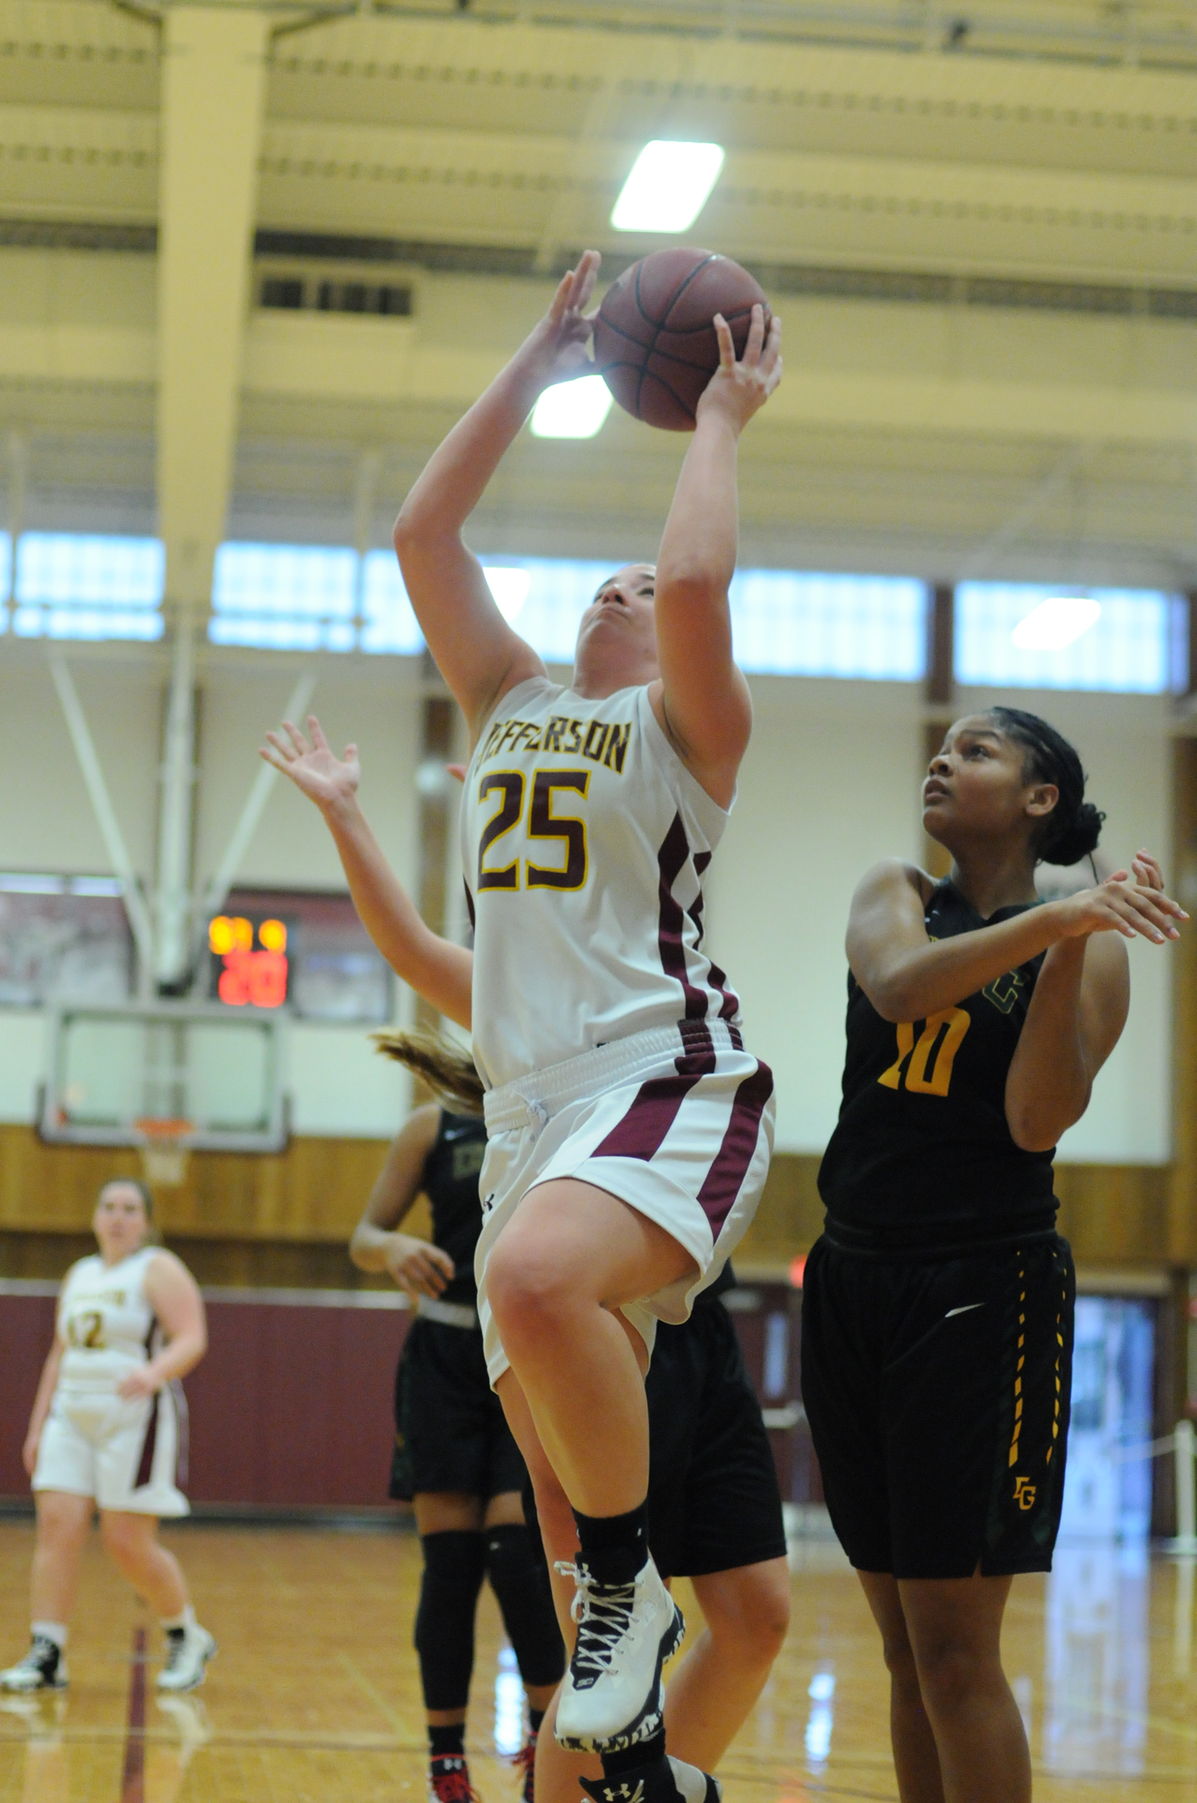 The Lady Cannoneers  Defeat the Visiting Lady Twins